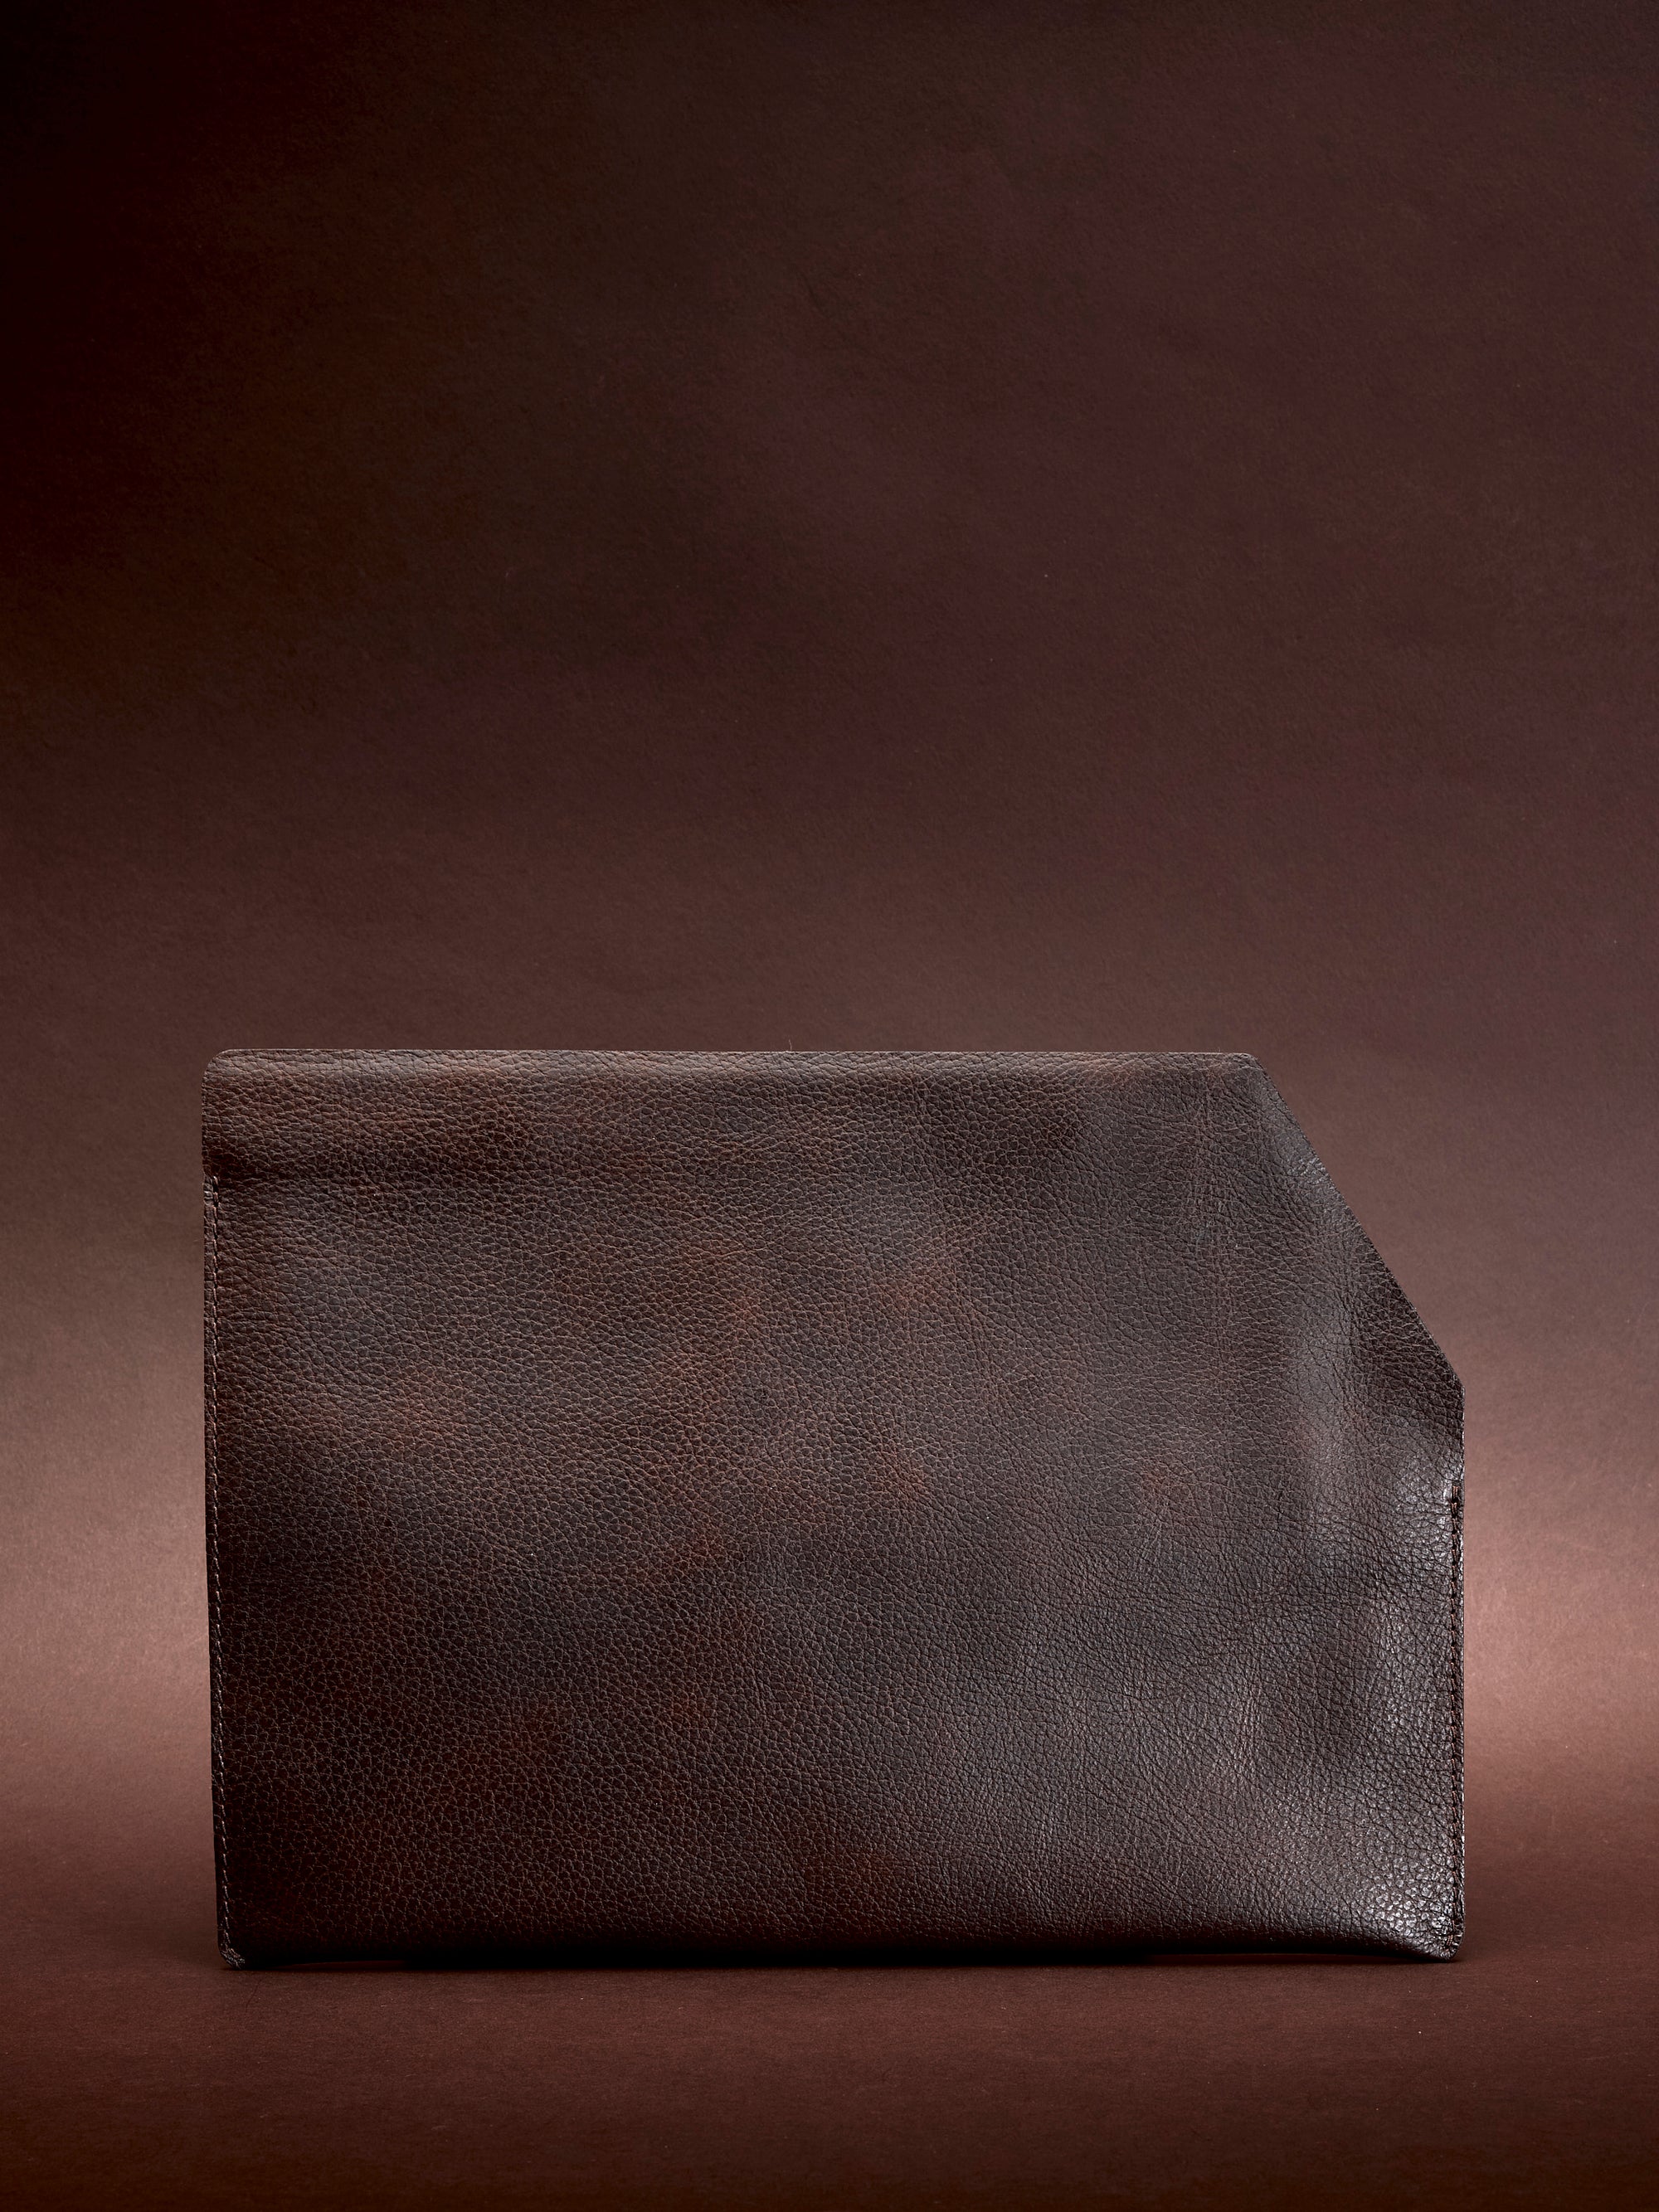 Front view. Draftsman 7 iPad Sleeve Dark Brown Color, iPad Pro 11-inch, iPad Pro 12.9-inch, M1 Chip by Capra Leather